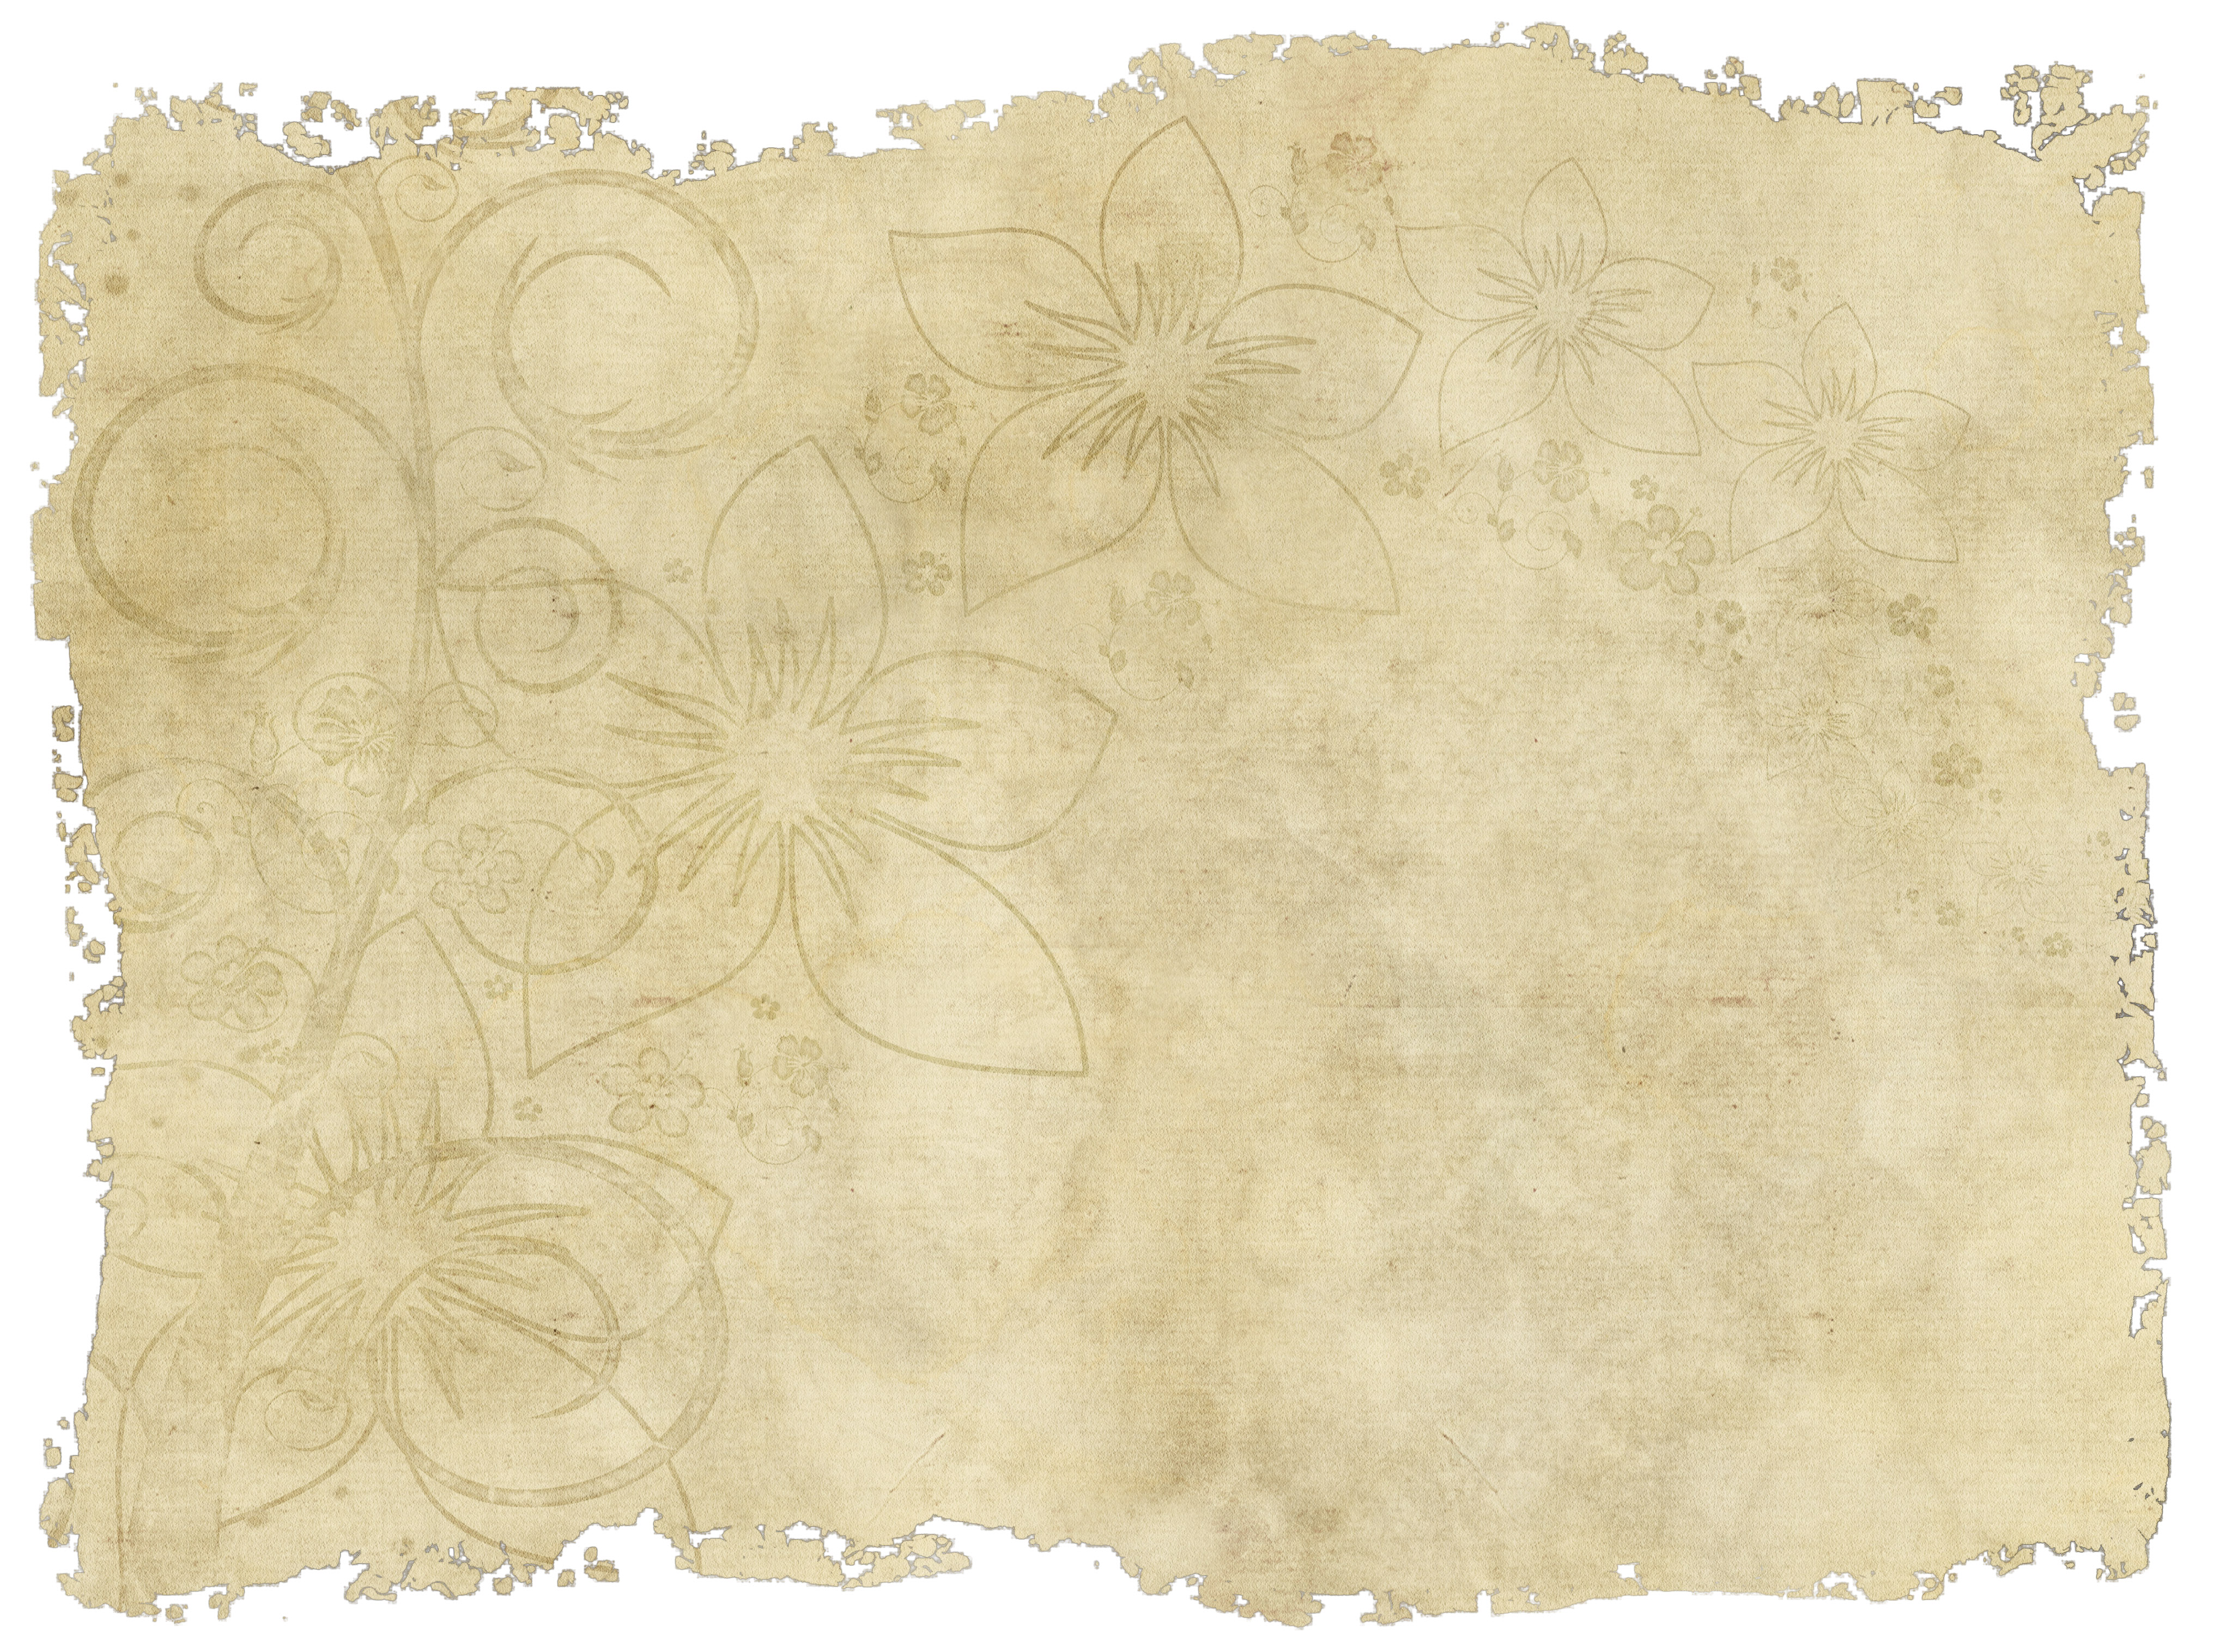 Faded Floral Design On Old Vintage Paper With Ripped And Torn Edges